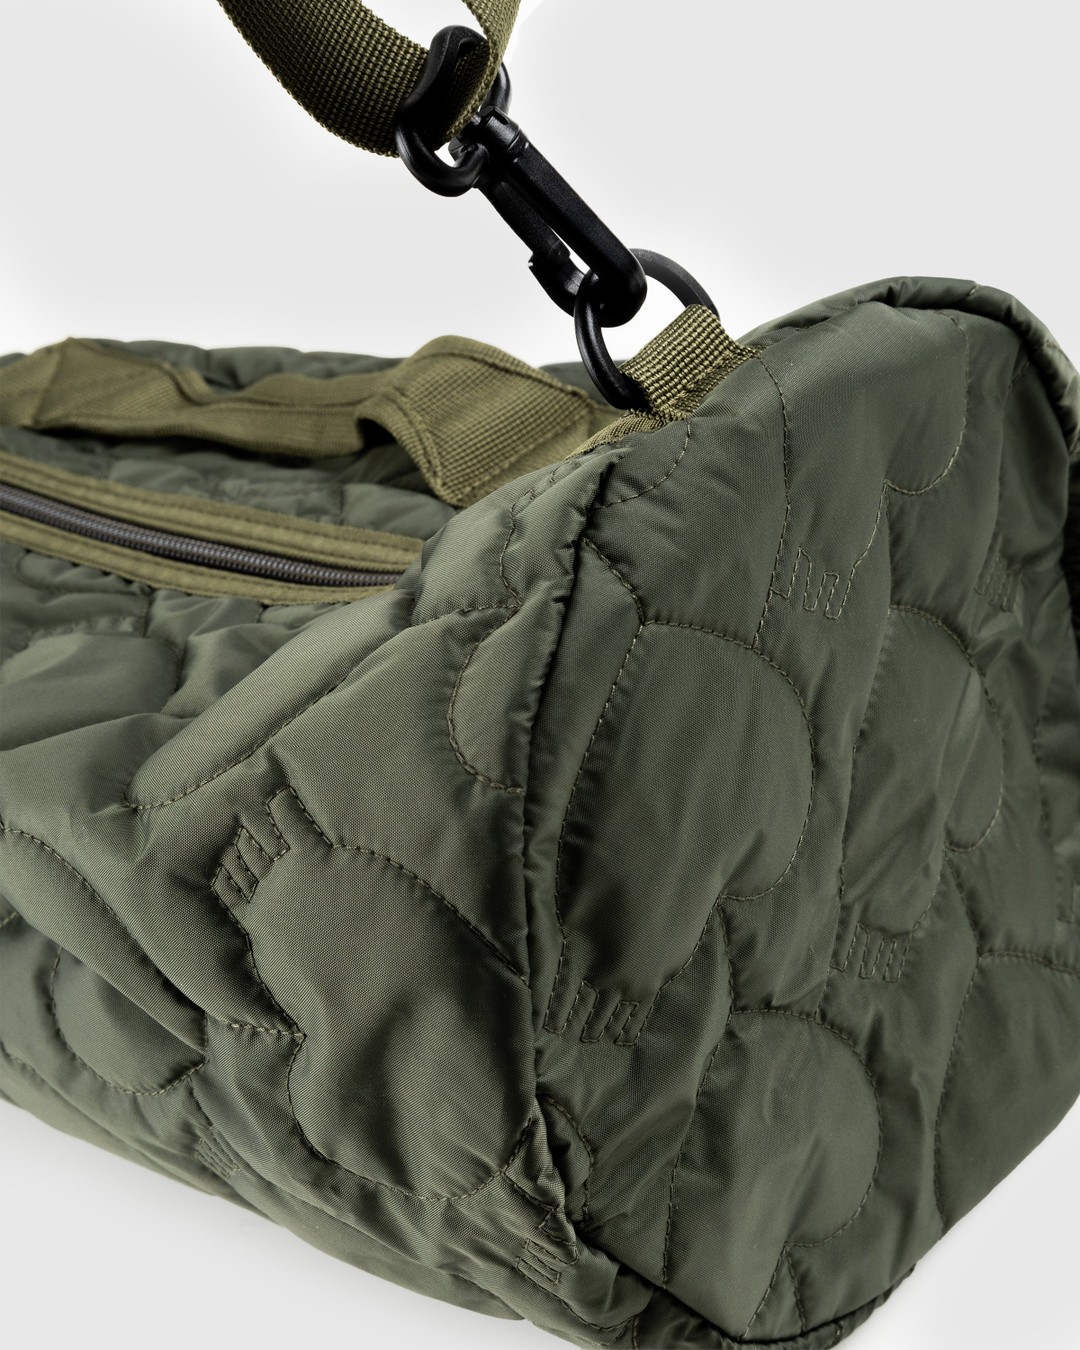 Human Made – Heart Quilting Bonsack Olive Drab | Highsnobiety Shop